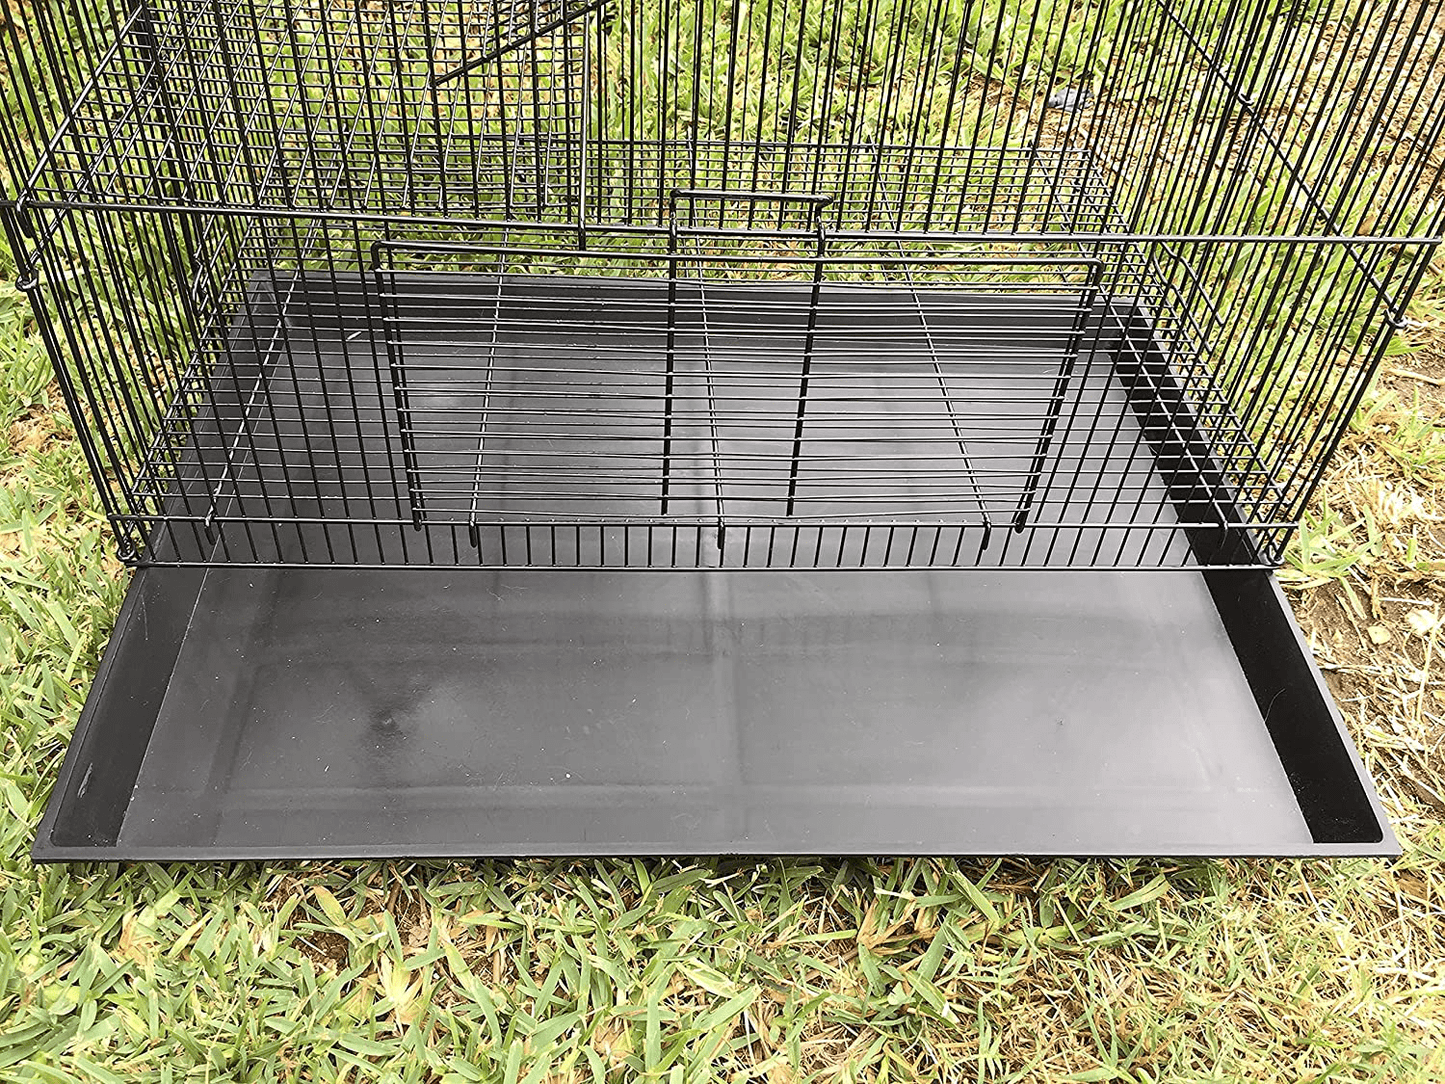 3 Levels Ferret Chinchilla Hamster Suger Glider Gerbil Rats Mouse Mice Guinea Pig Rodent Degu Dagus Small Animal Cage, Tight 3/8-Inch Bar Spacing Animals & Pet Supplies > Pet Supplies > Small Animal Supplies > Small Animal Habitats & Cages Mcage   